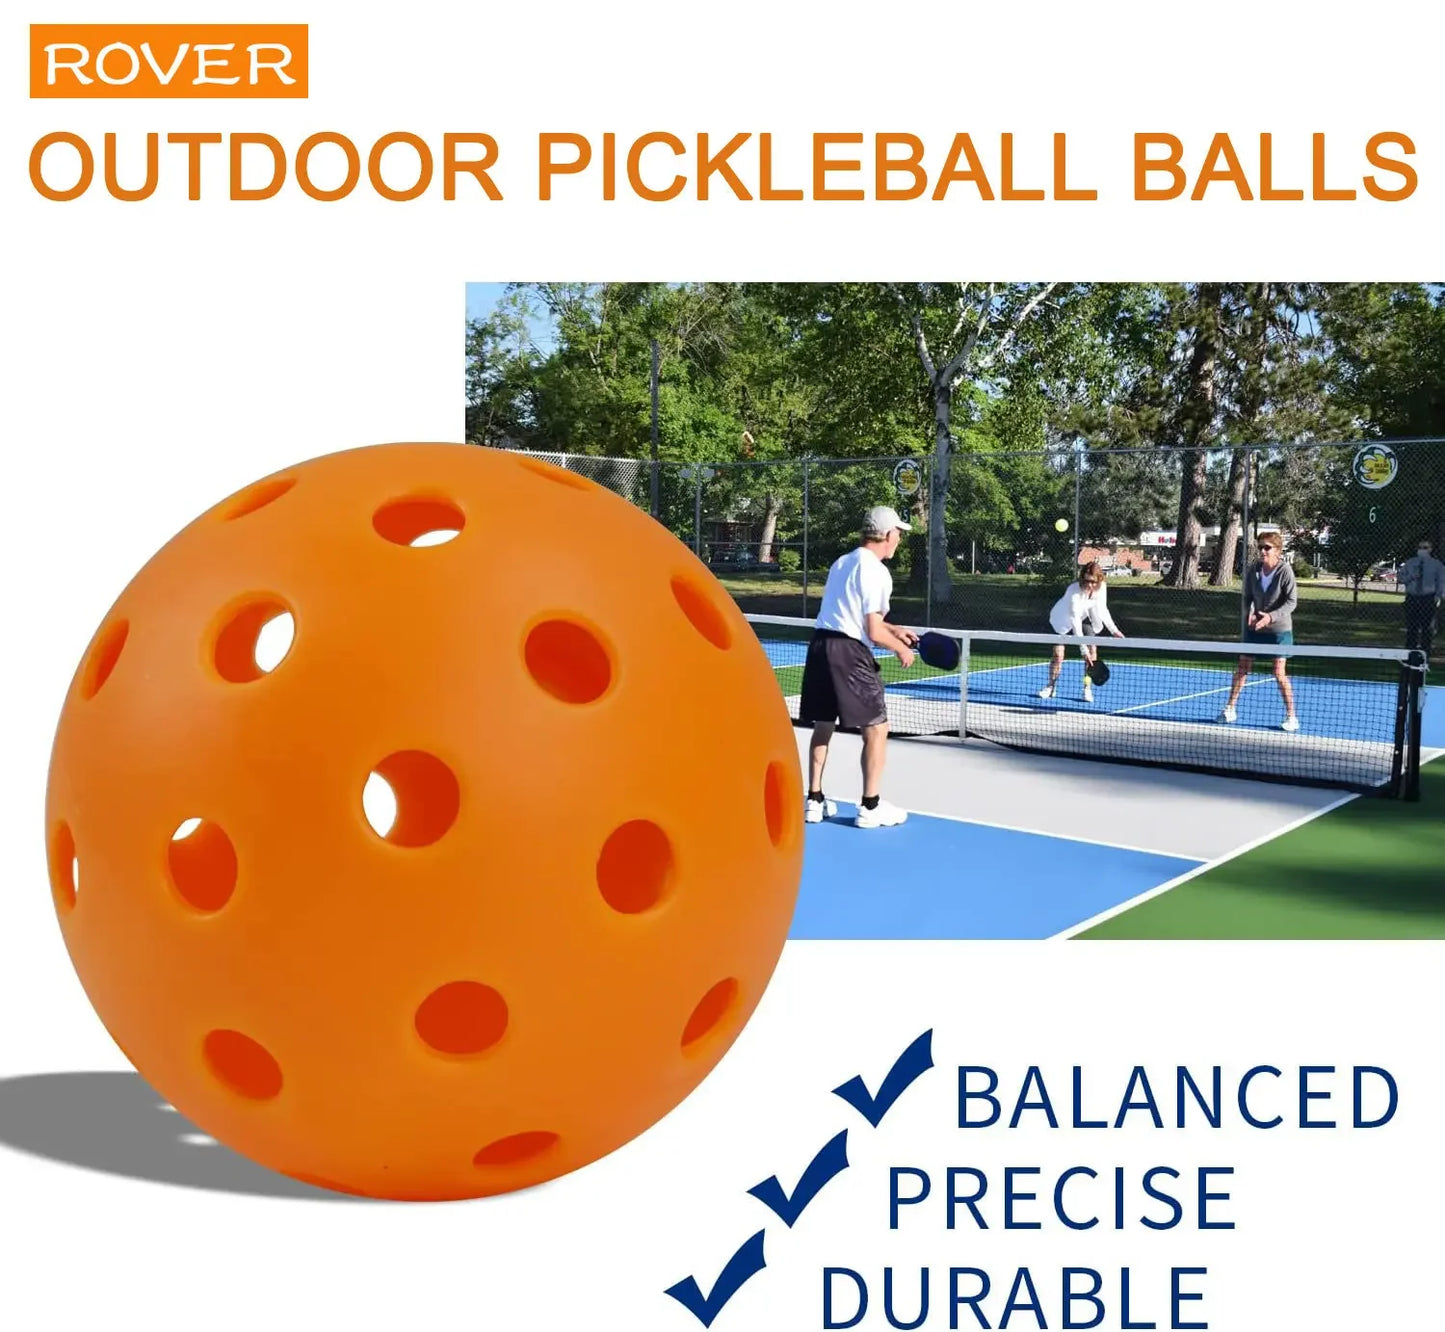 Durable Pickleball Set - 74MM, 40-Hole Design, 26g Competition-Grade Outdoor Pickleballs in Packs of 6, 12, or 24